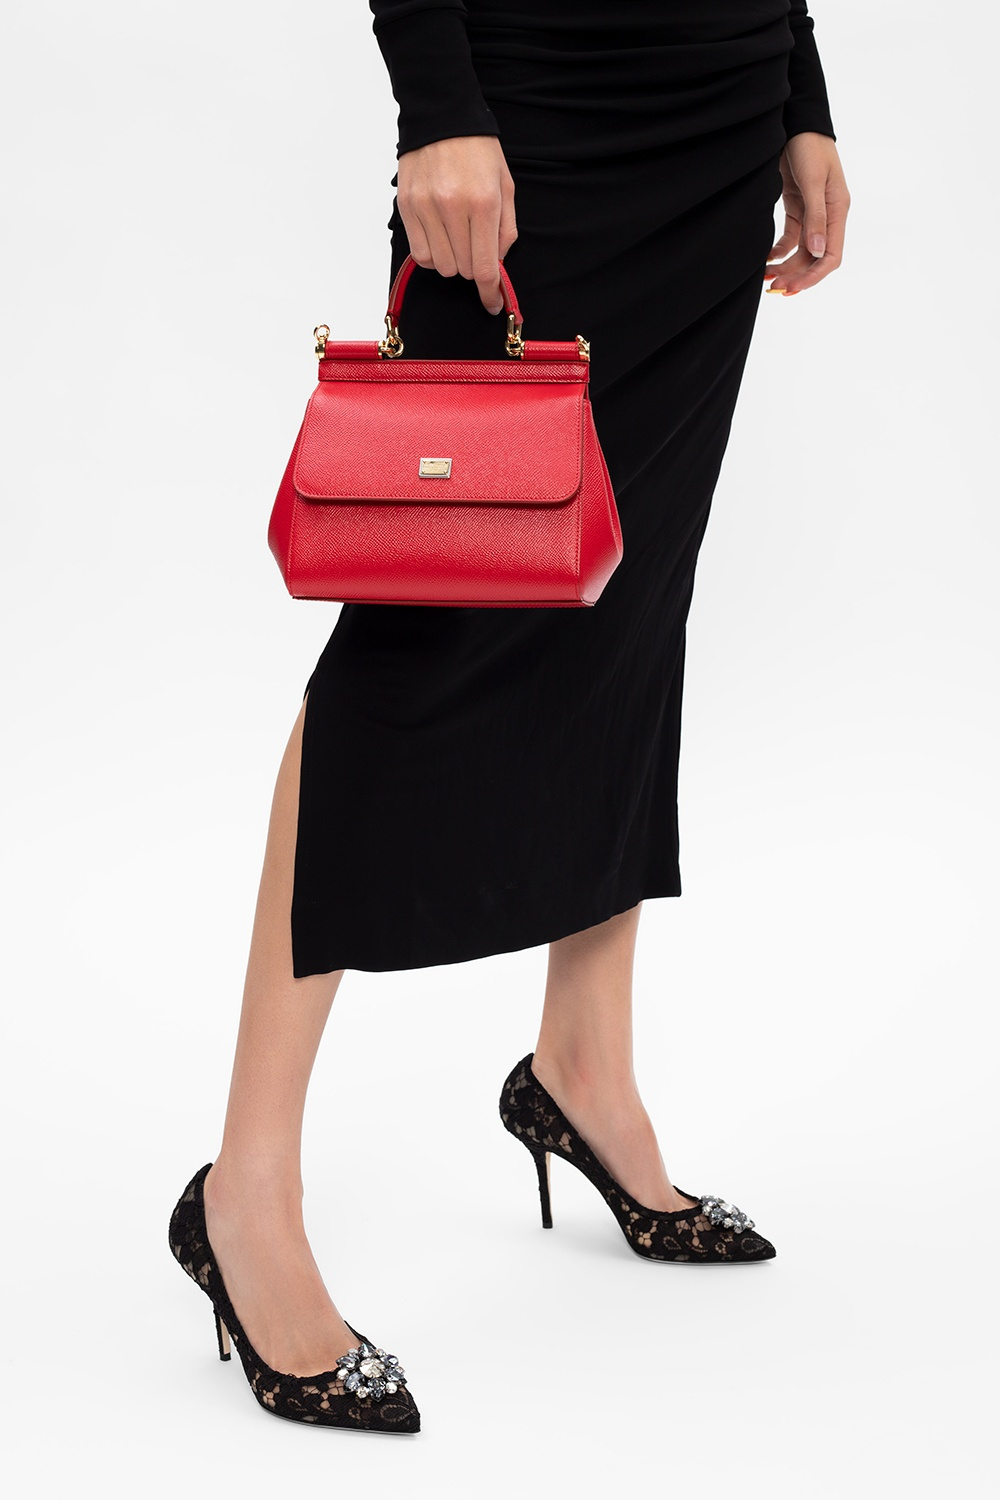 Dolce & Gabbana Sicily Small Bag Stampa Dauphine in Red